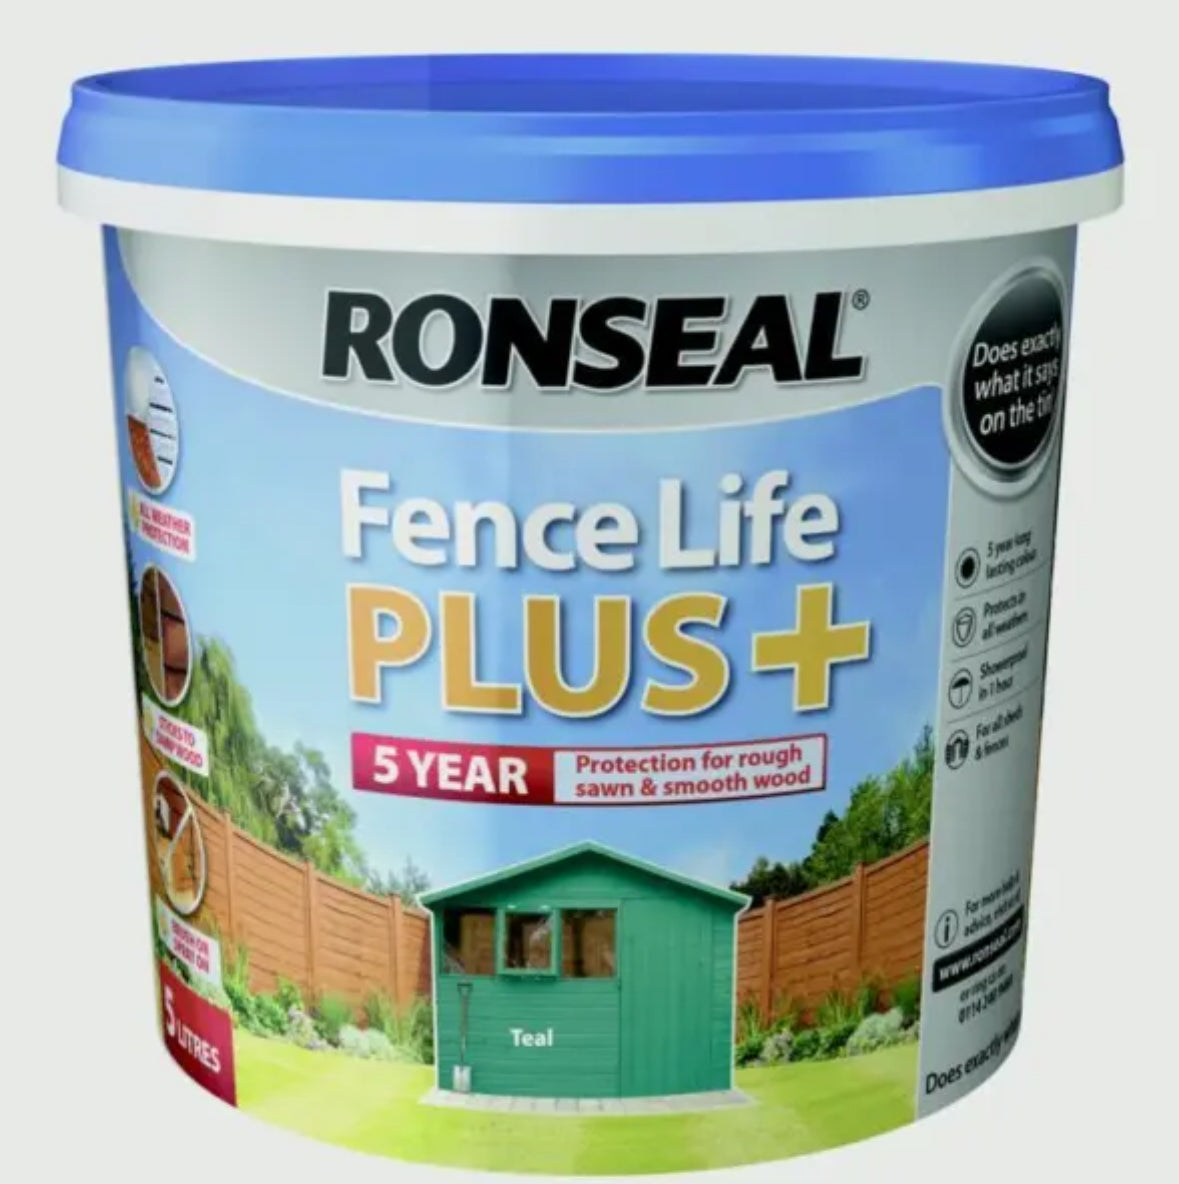 Ronseal Fence Life Plus Garden Shed & Fence Paint 5lt